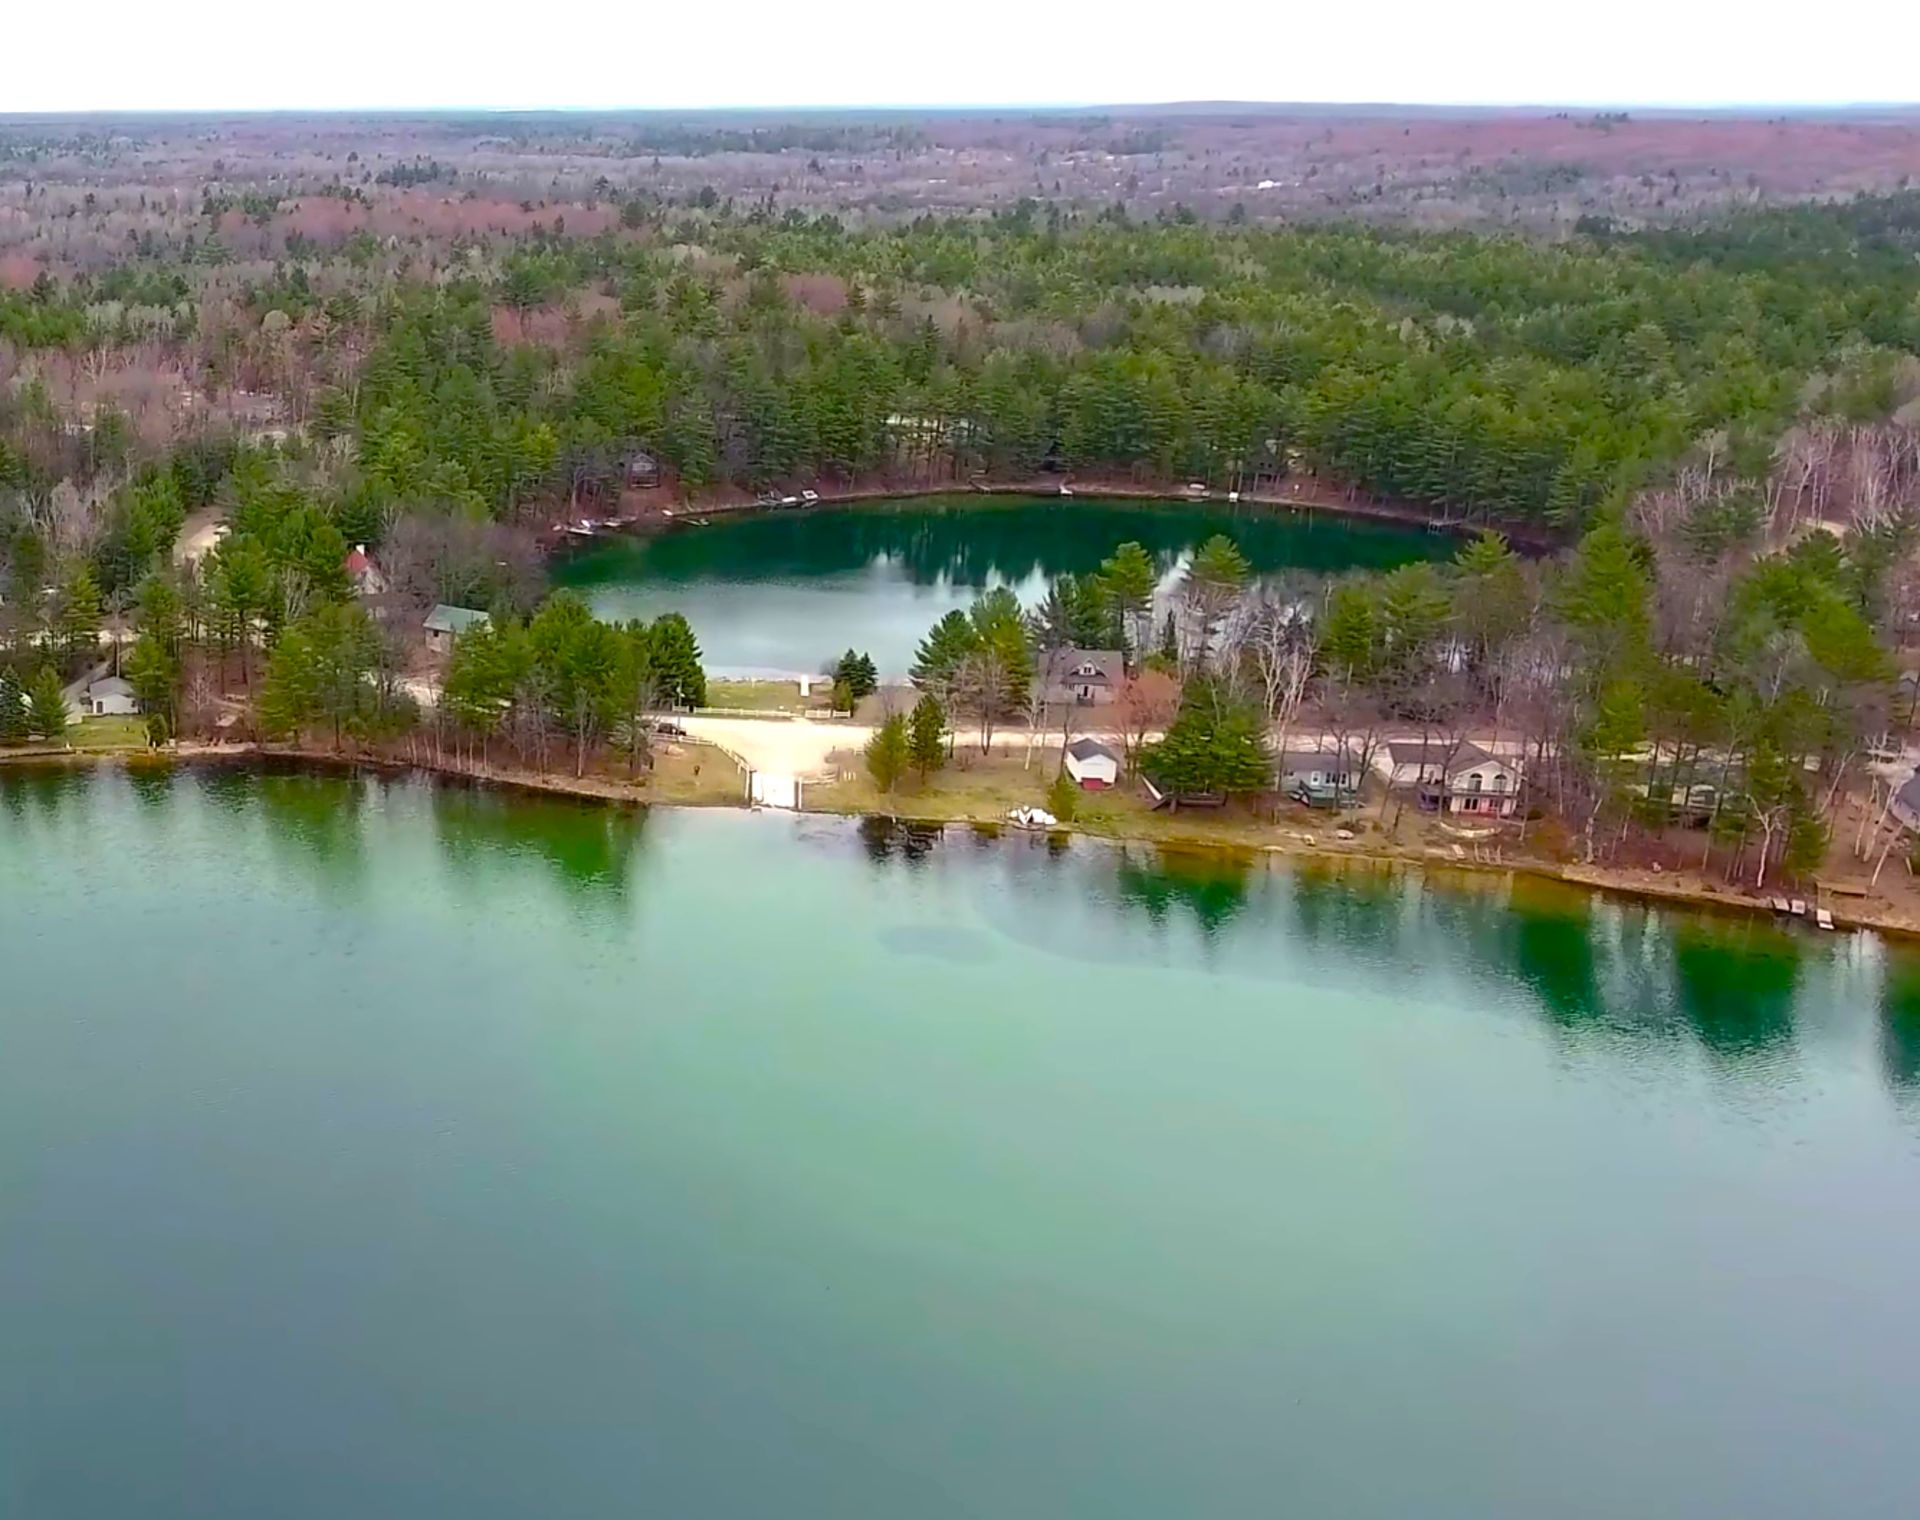 Discover the Tranquility of the Lake Arrowhead Community Nestled in Otsego County, Michigan! - Image 2 of 10